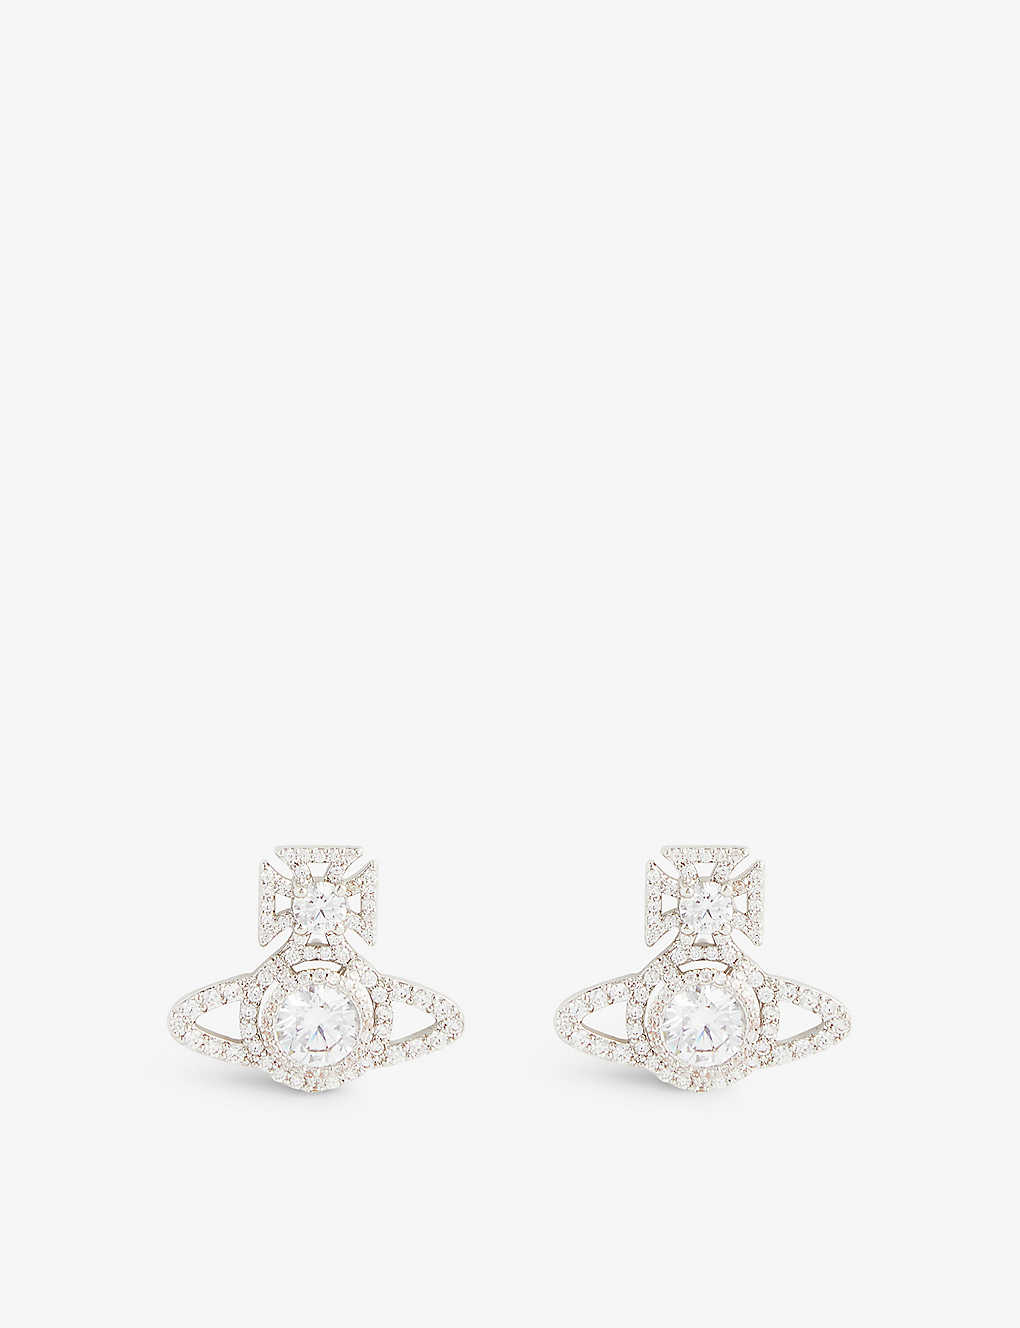 Vivienne Westwood Jewellery Norabelle Brass And Cubic Zirconia Earrings In Platinum / White Cz